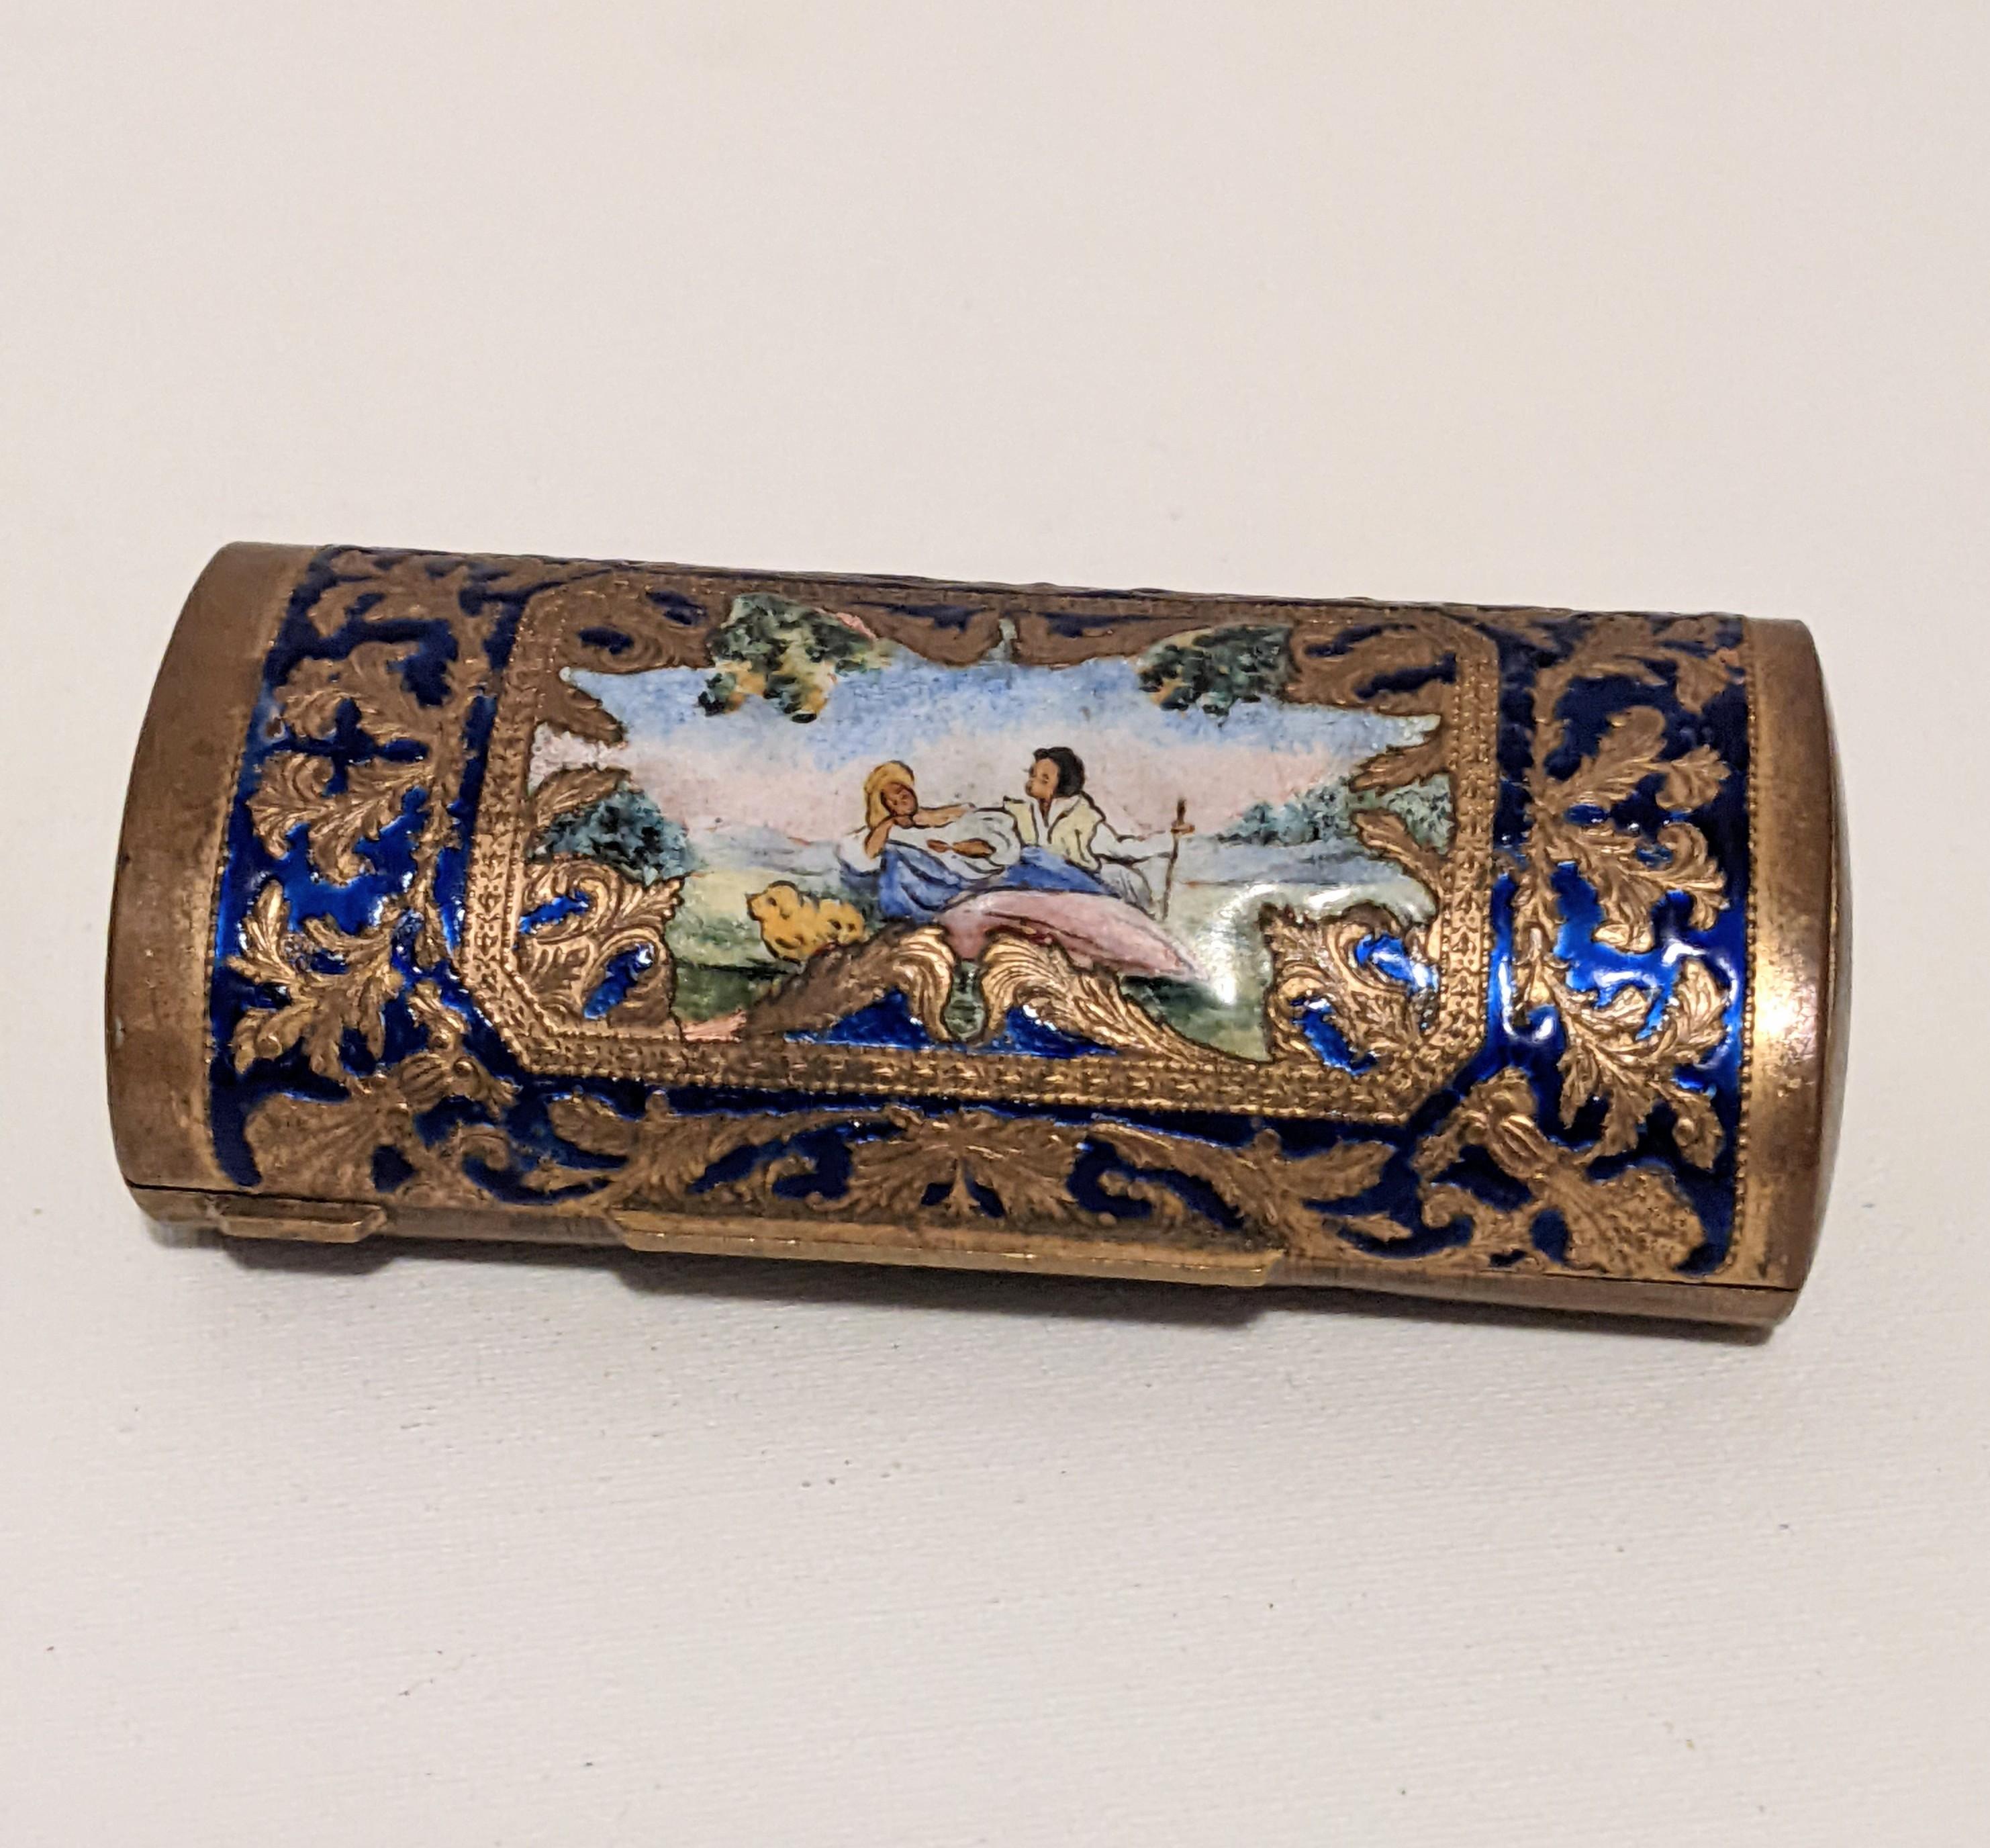 Charming Enamel Brass Pillbox or cigarette case with pastoral scene on hinged cover set within deep blue enamel scrollwork. Best for use as decorative desk piece or can be used in a purse within a felt pouch as enamel is delicate. 
1950's Italy.  4